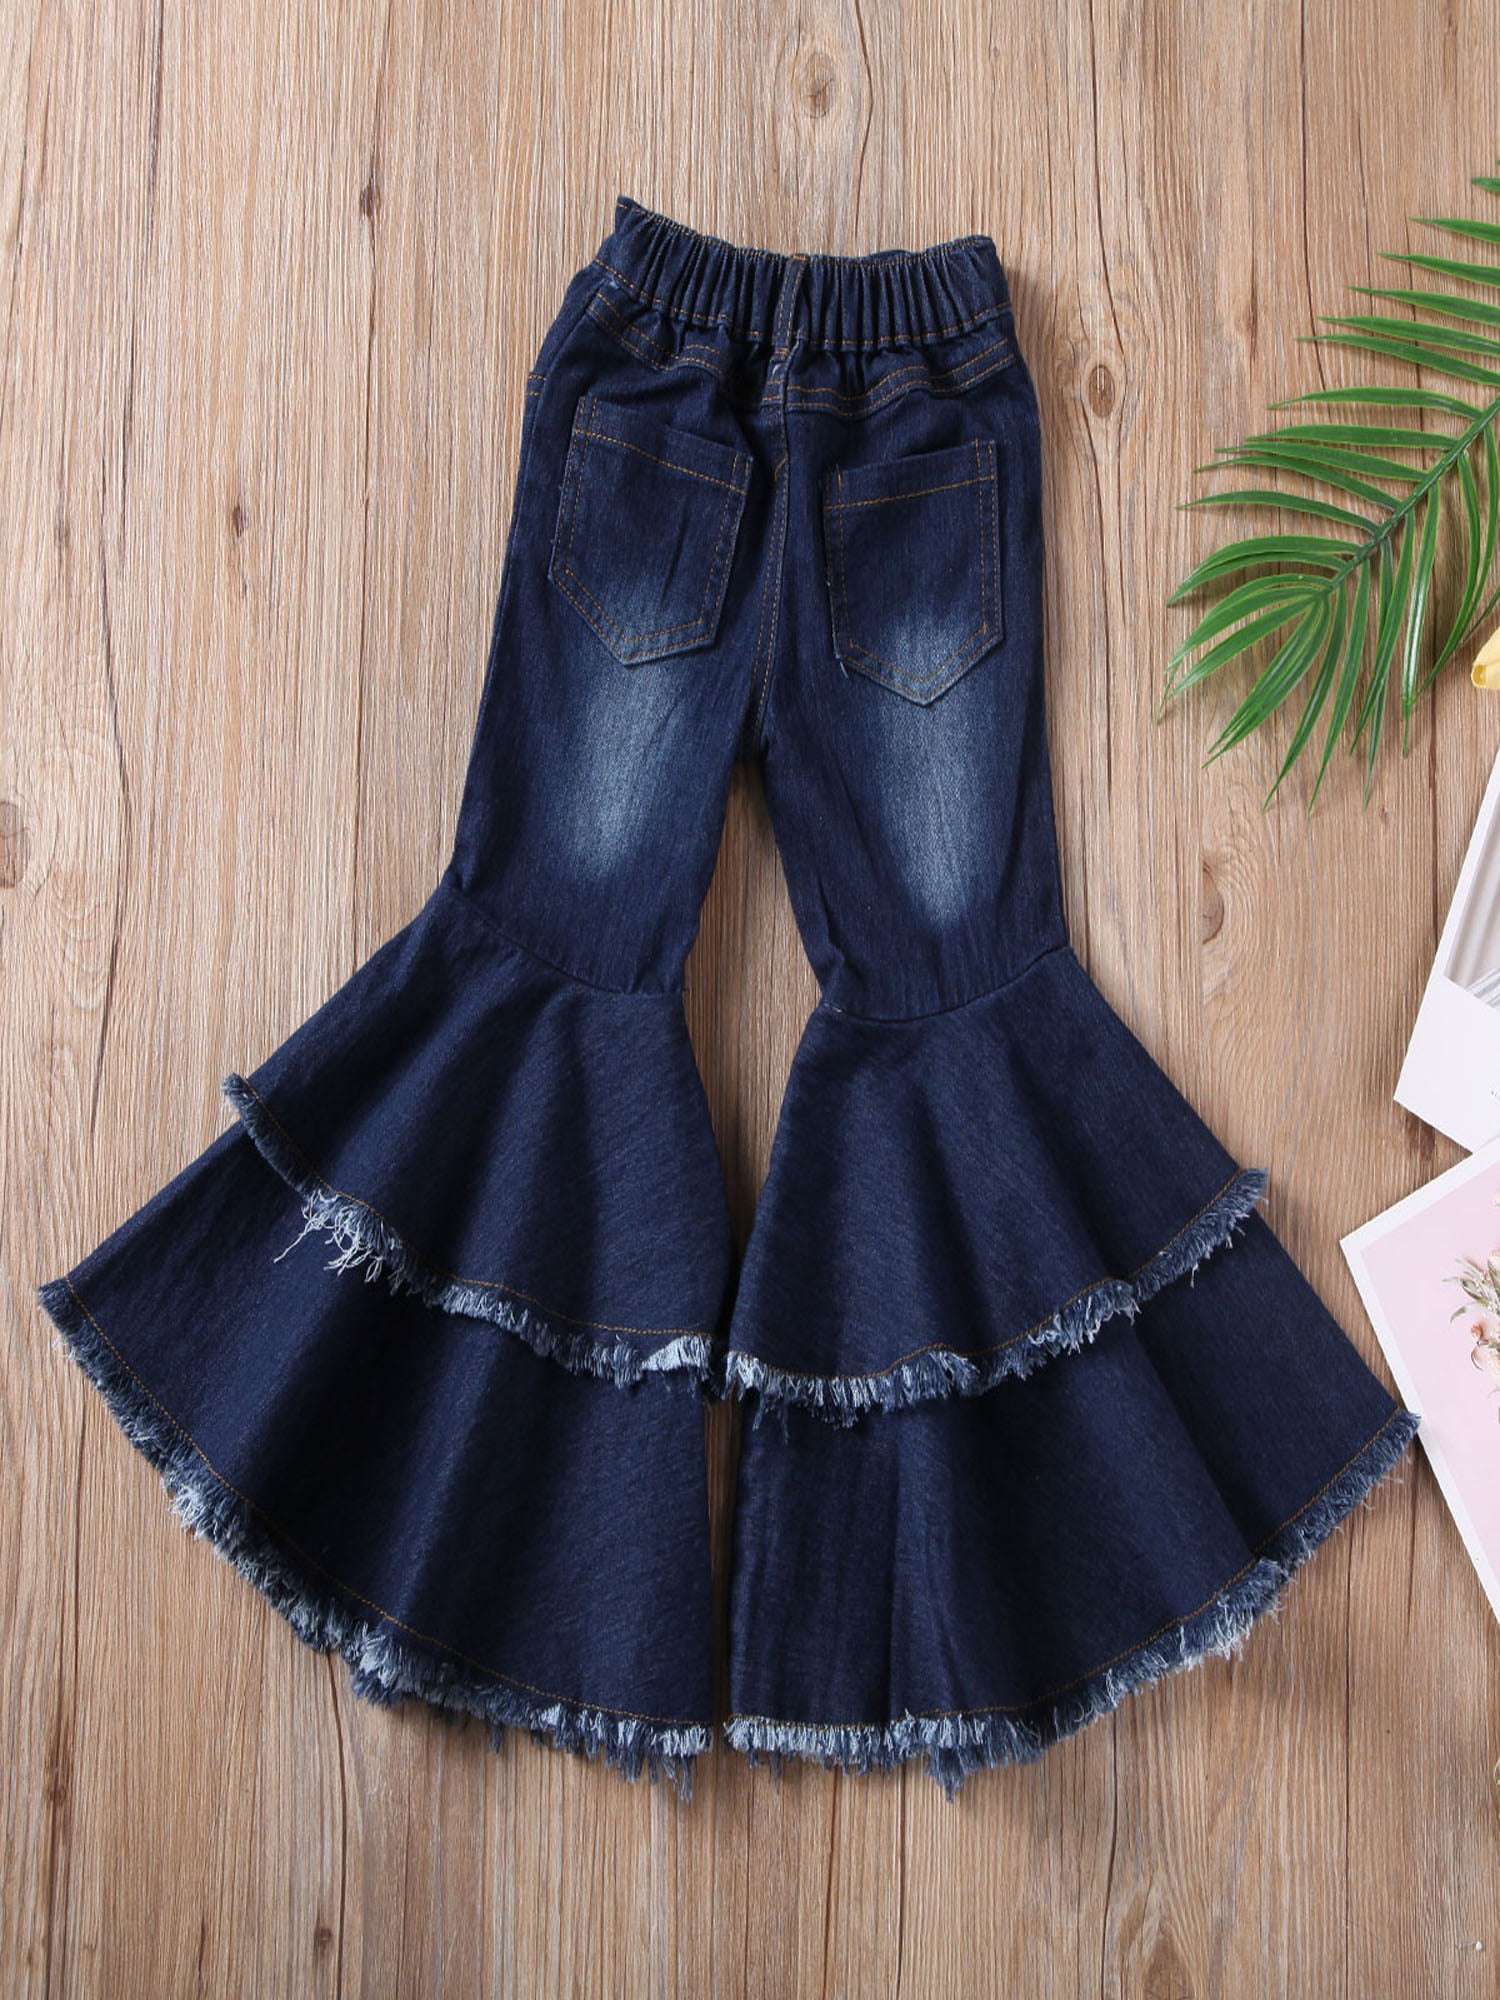 Agoky Girls Ruffle Flare Bell-Bottoms Denim Jeans Kids Youth Waistband High Waisted Pants Leggings Flare Trousers